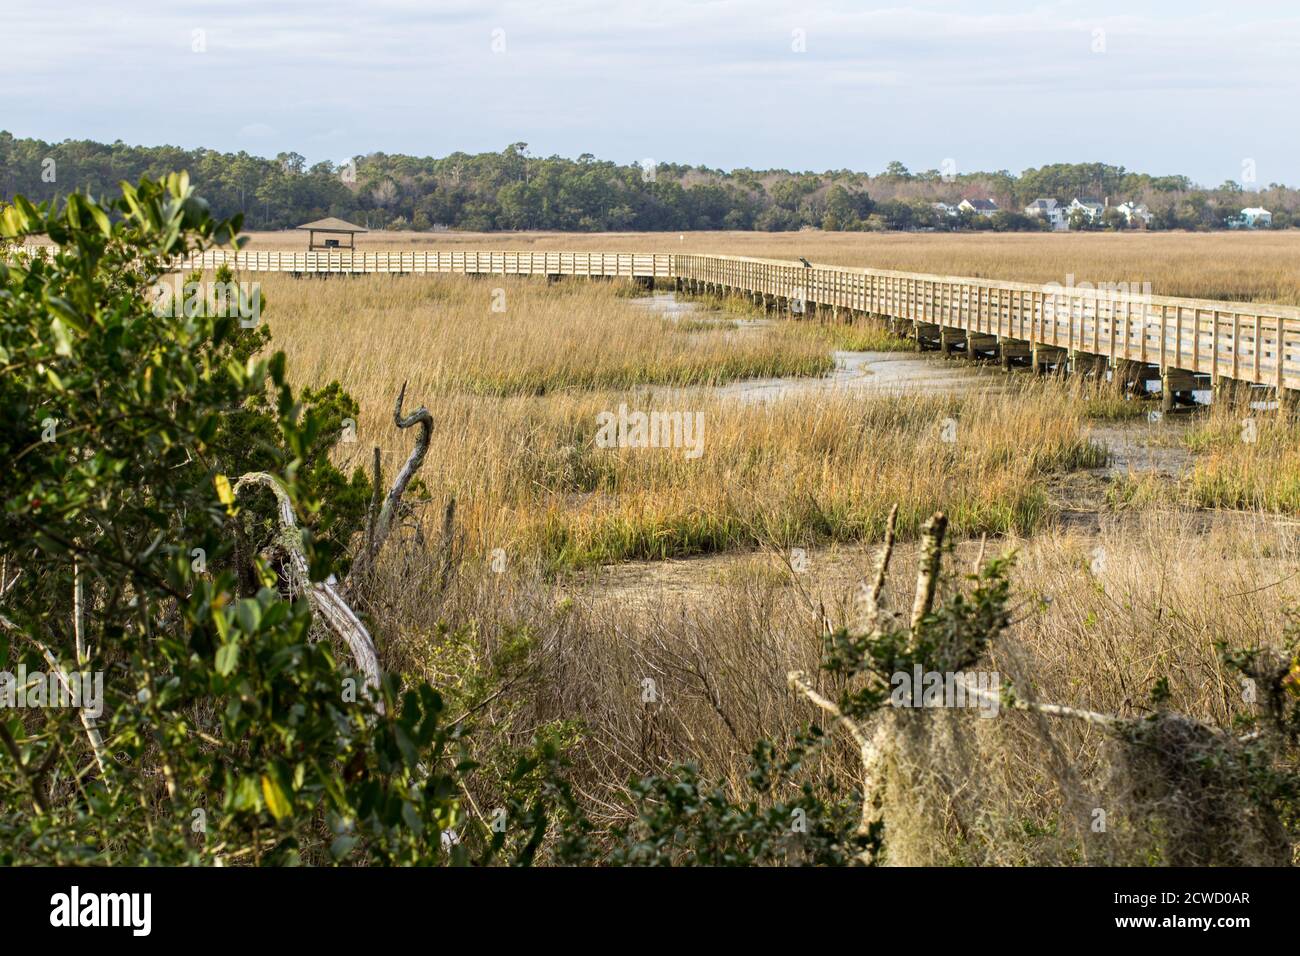 South Carolina Low Country. Boardwalk through the Carolina low country at Huntington Beach State Park between Myrtle Beach and Charleston, SC. Stock Photo